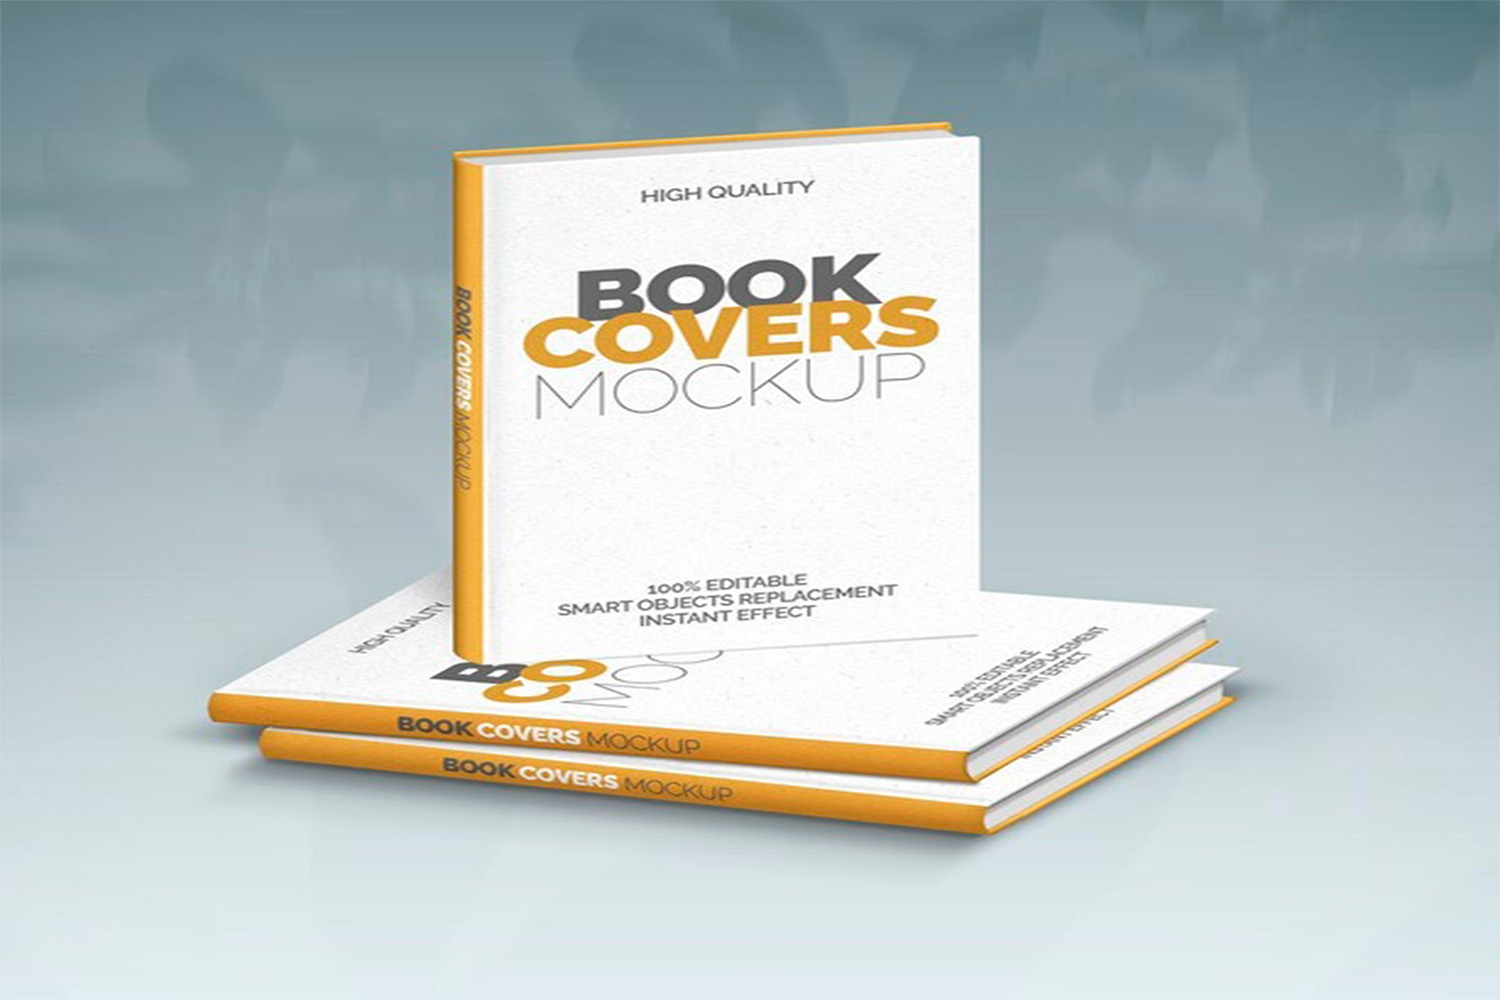 Three-book-covers-mockup-Free-Download